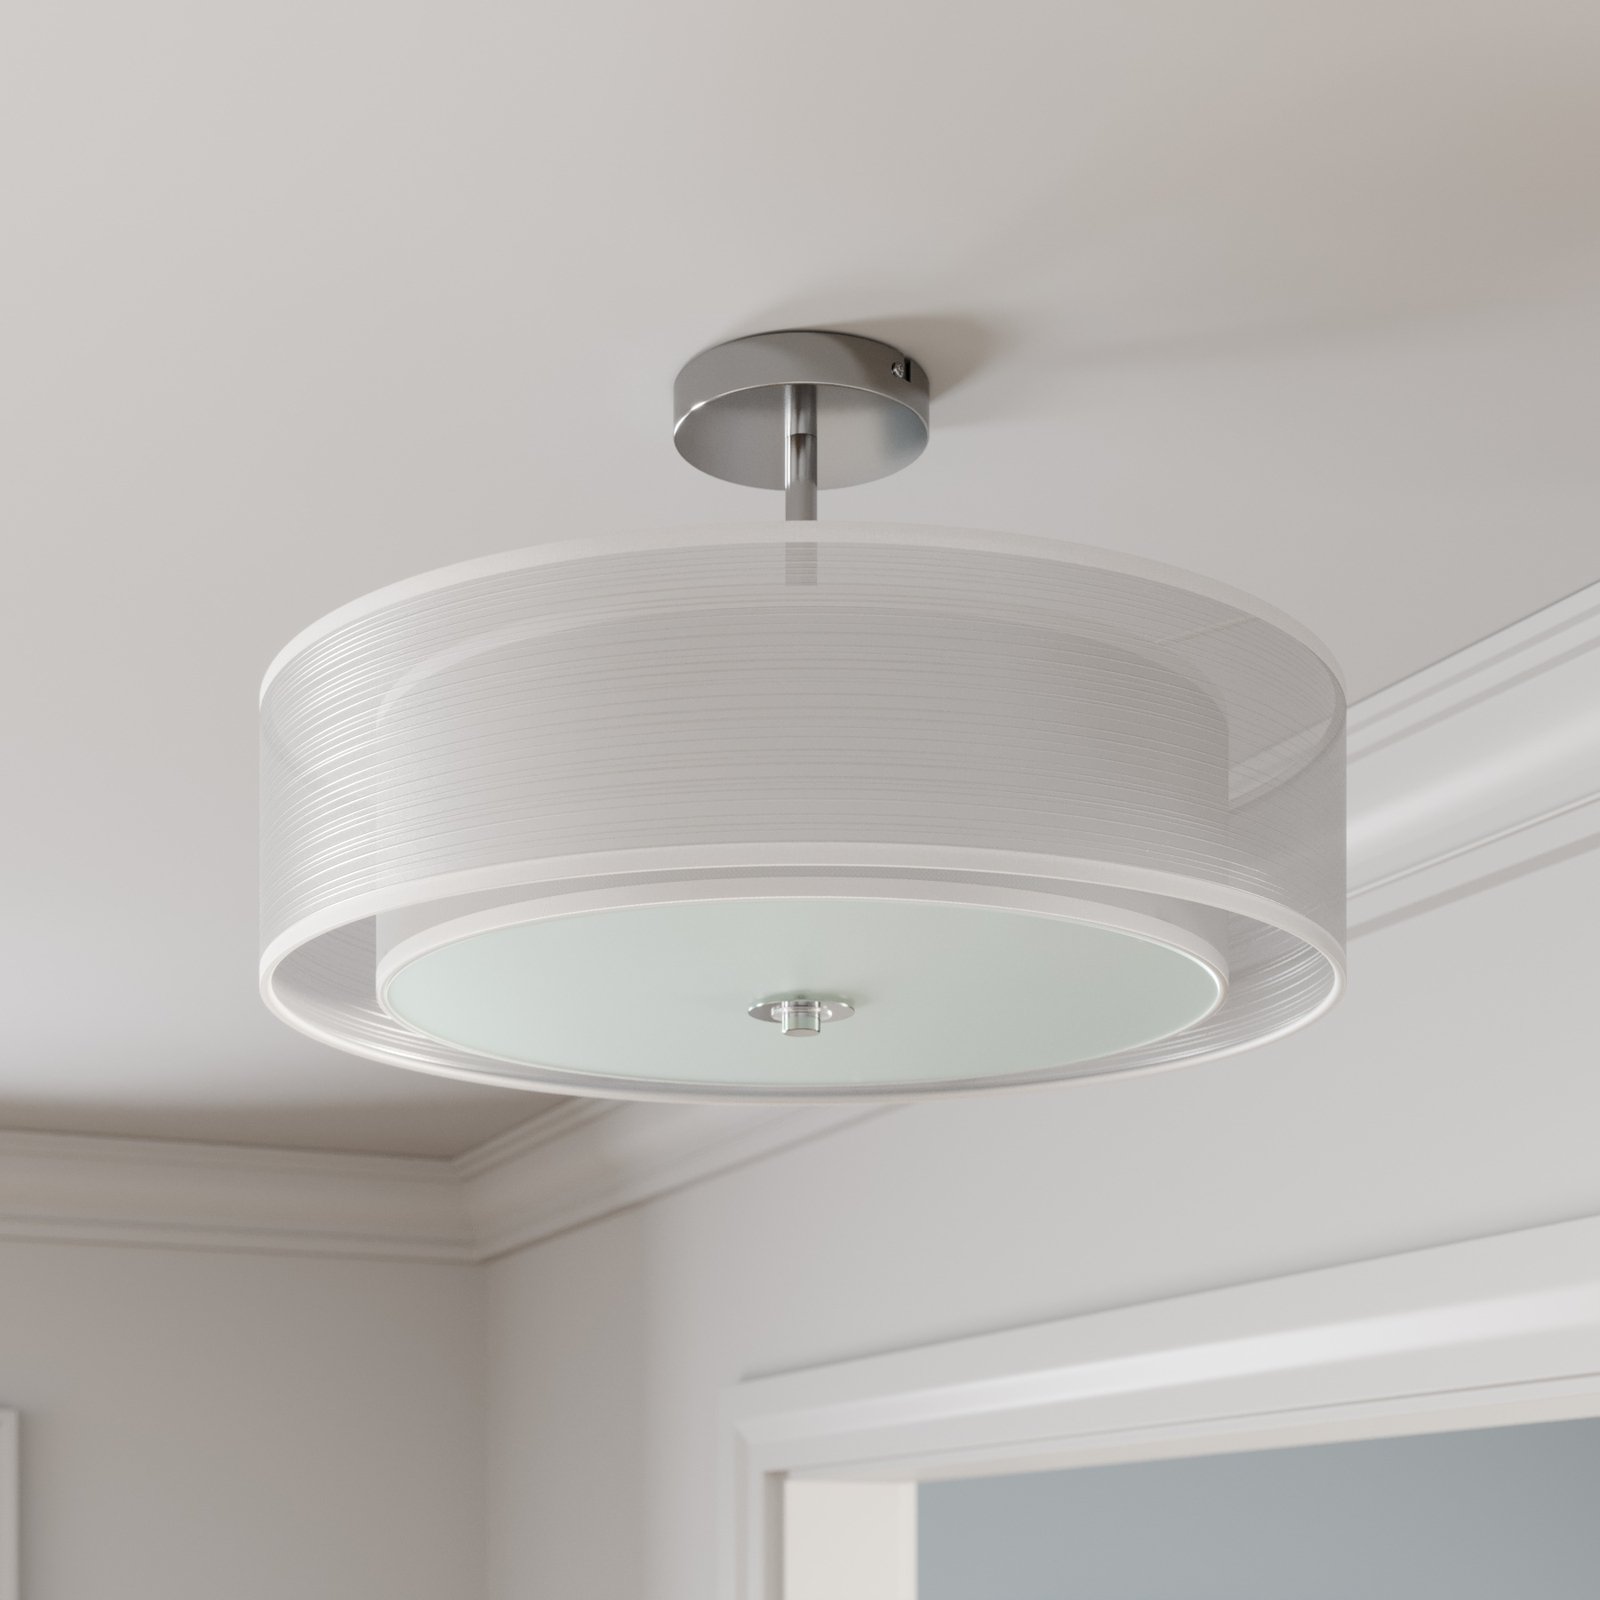 Pikka ceiling light with a white lampshade